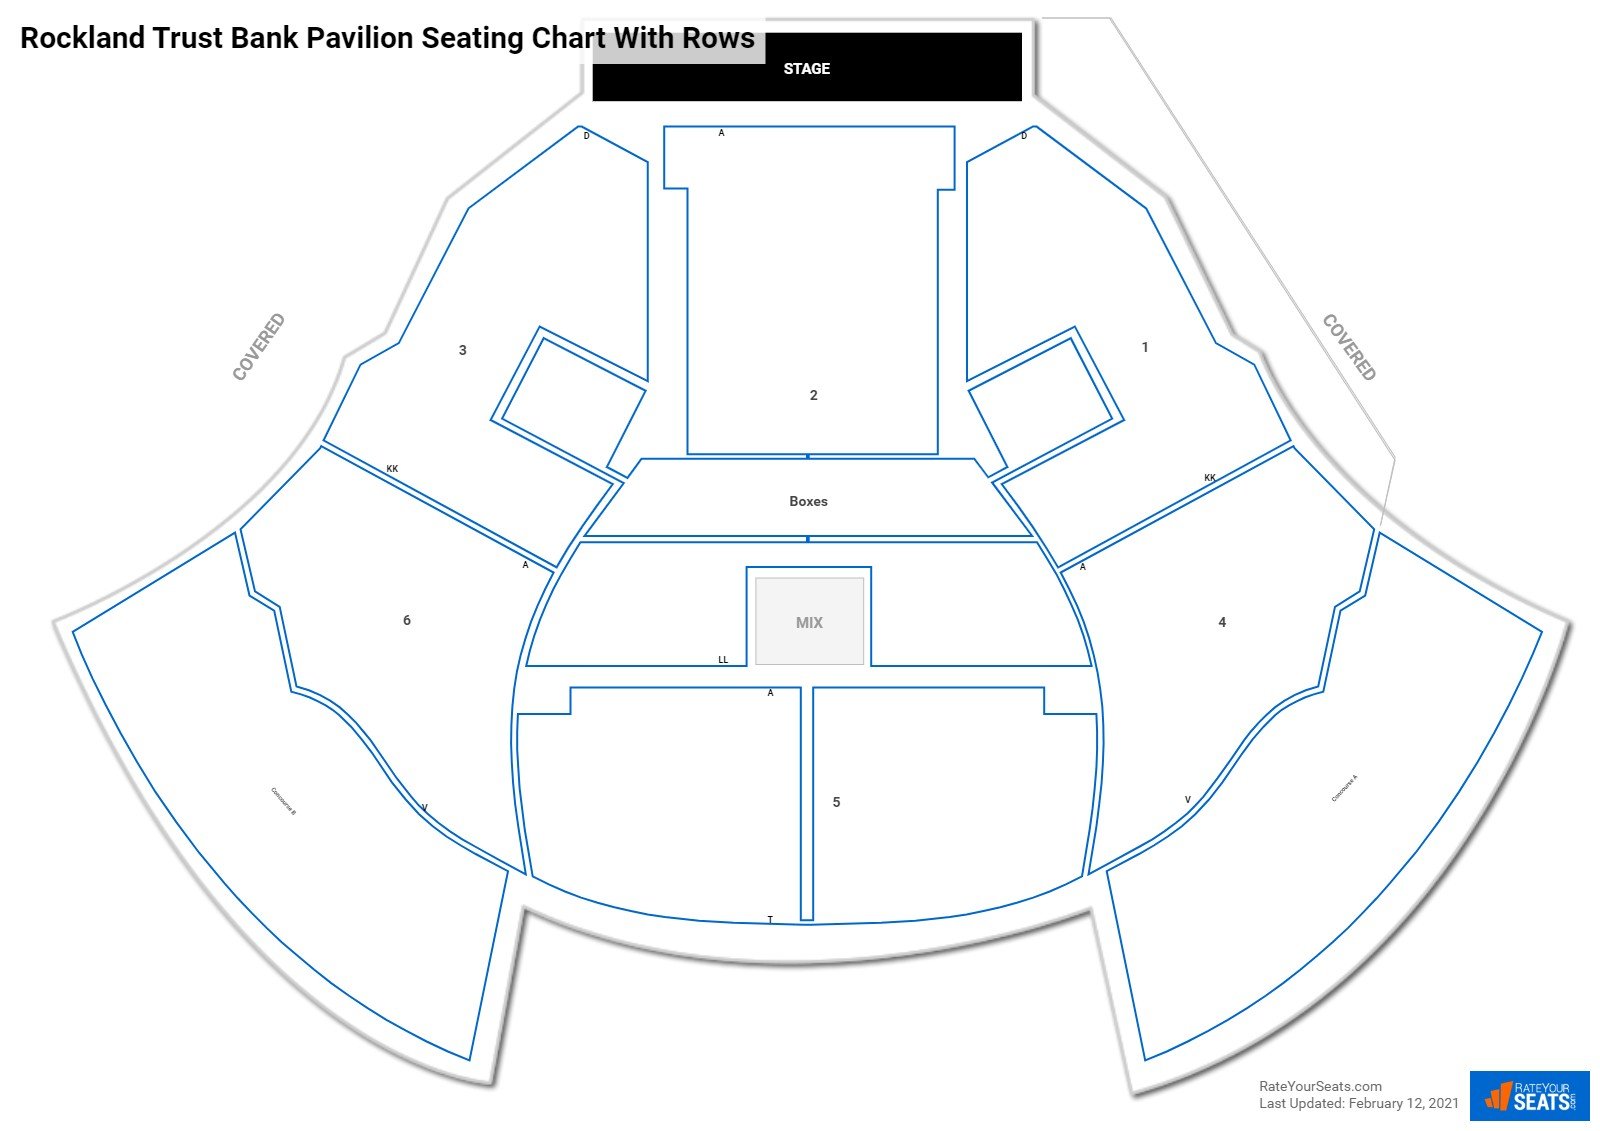 Leader Bank Pavilion seating chart with row numbers